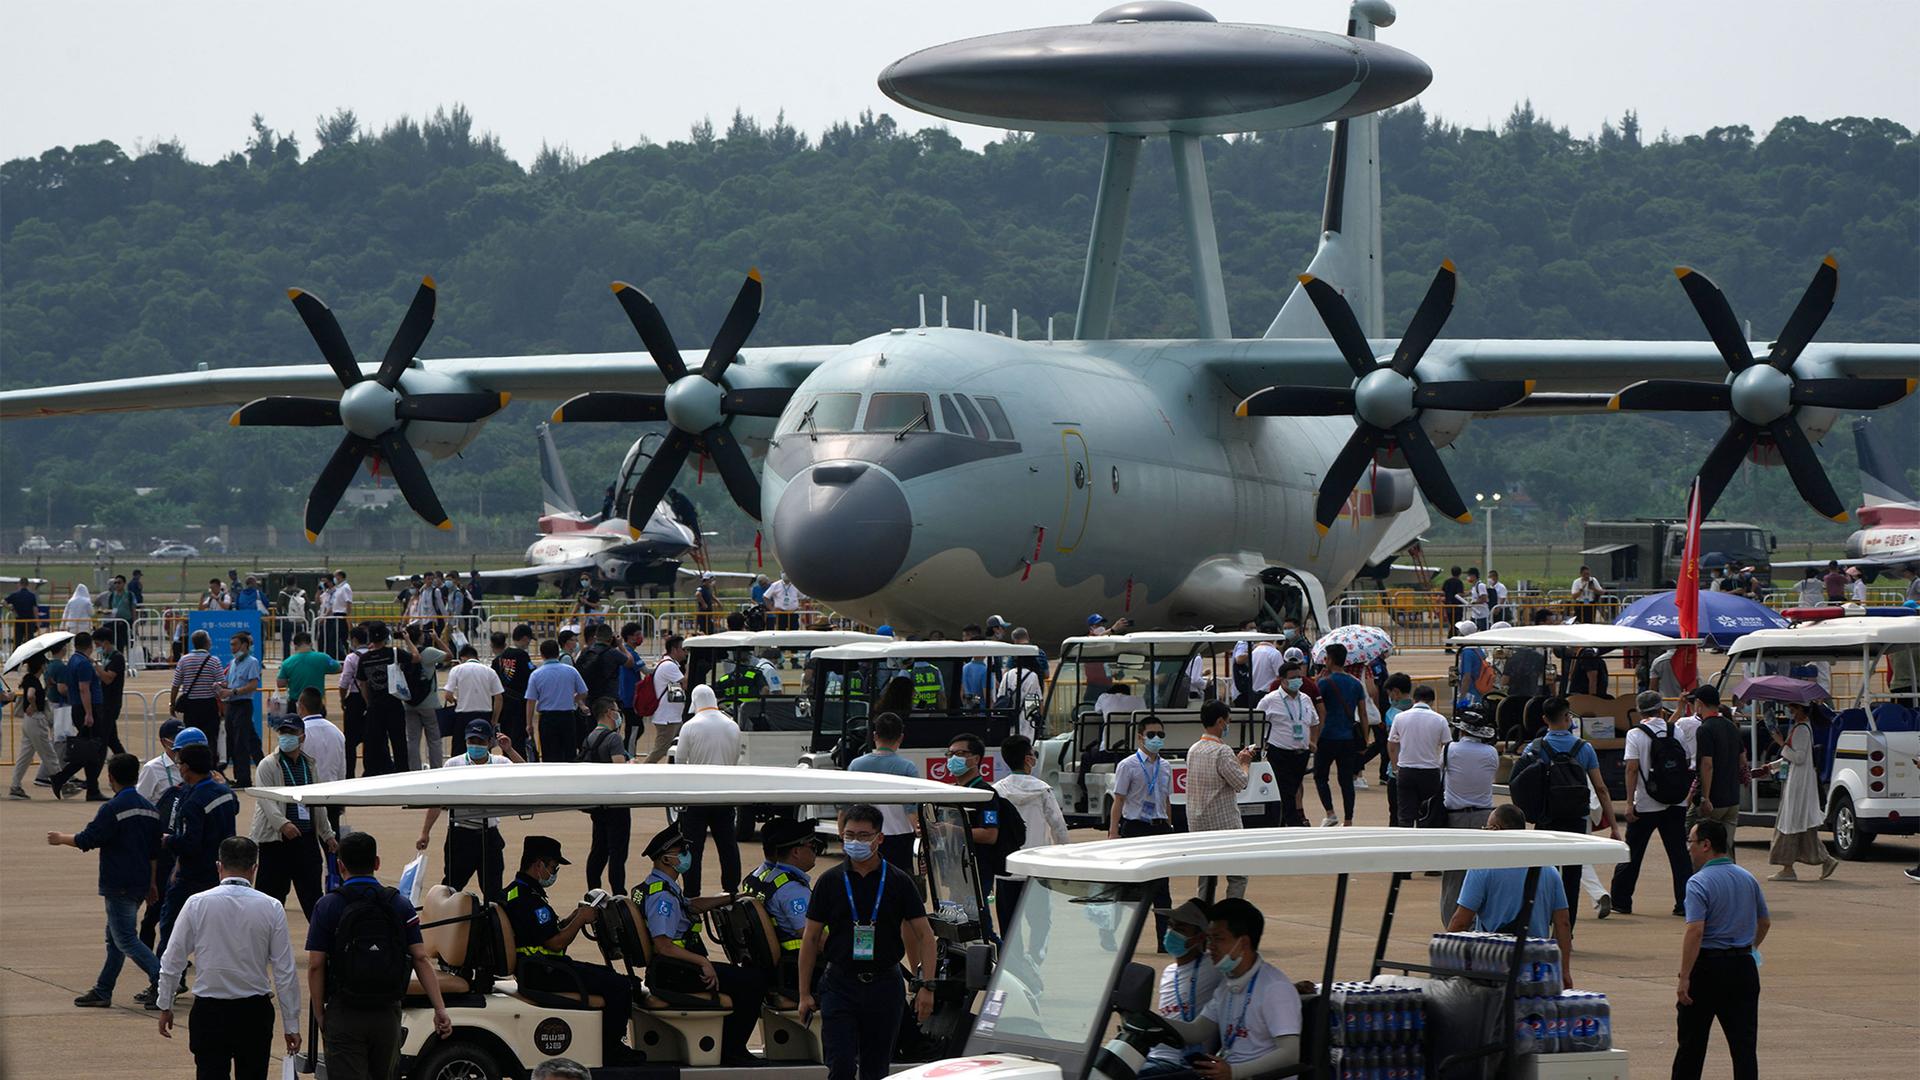 Visitors look at the Chinese military's KJ-500 airborne early warning and control aircraft during 13th China International Aviation and Aerospace Exhibition, also known as Airshow China 2021, in Zhuhai in southern China's Guangdong province